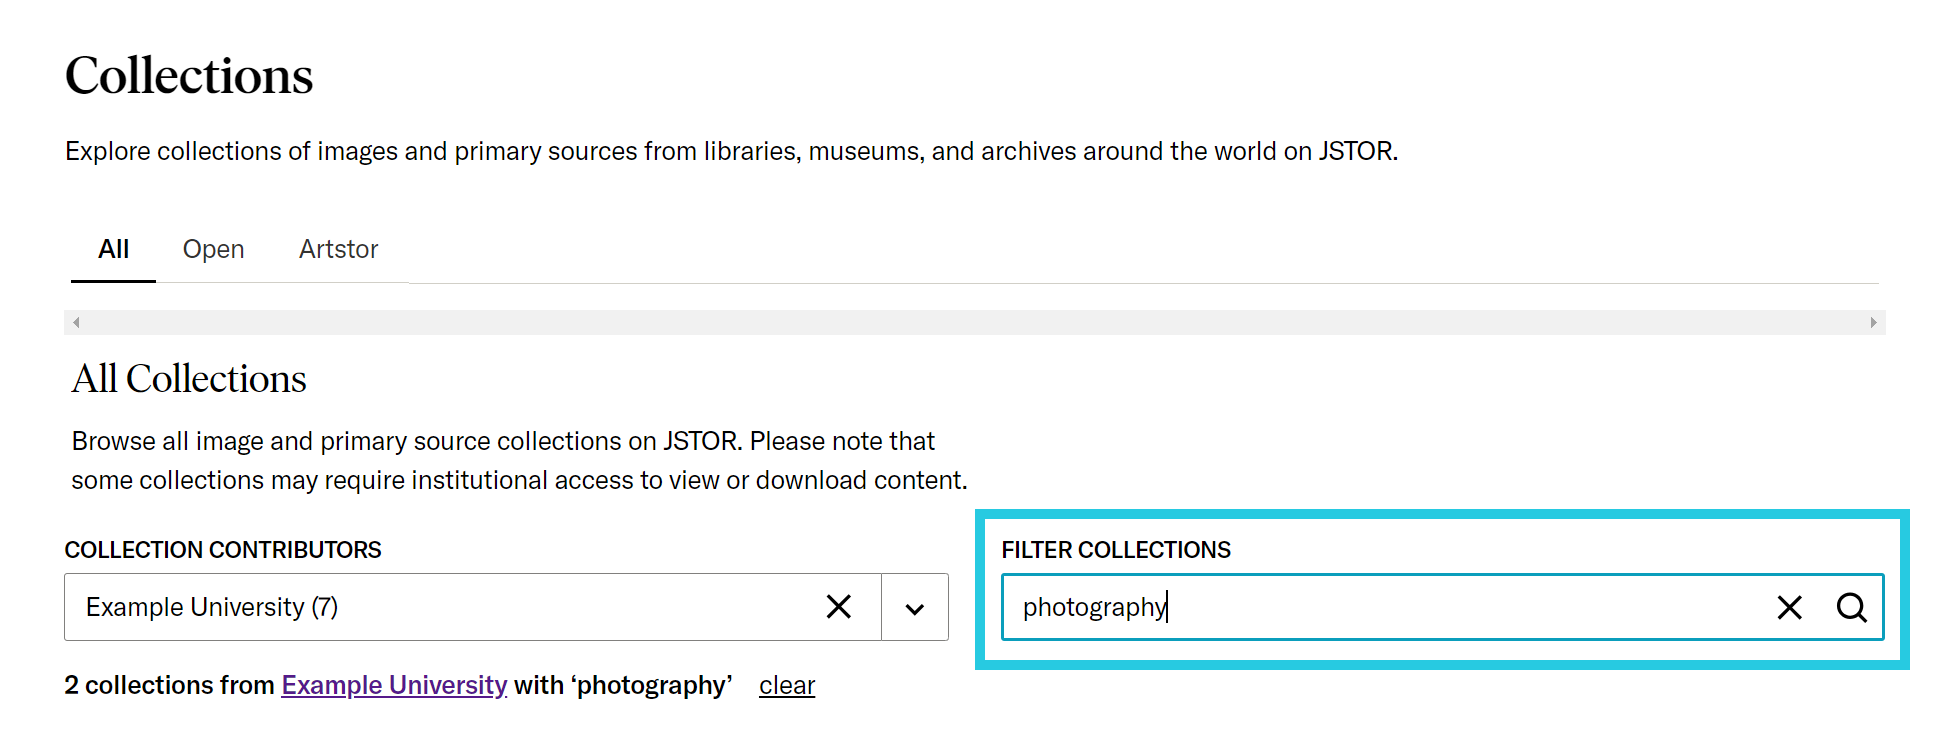 Viewing collections from a specific collection contributor filtered by a term